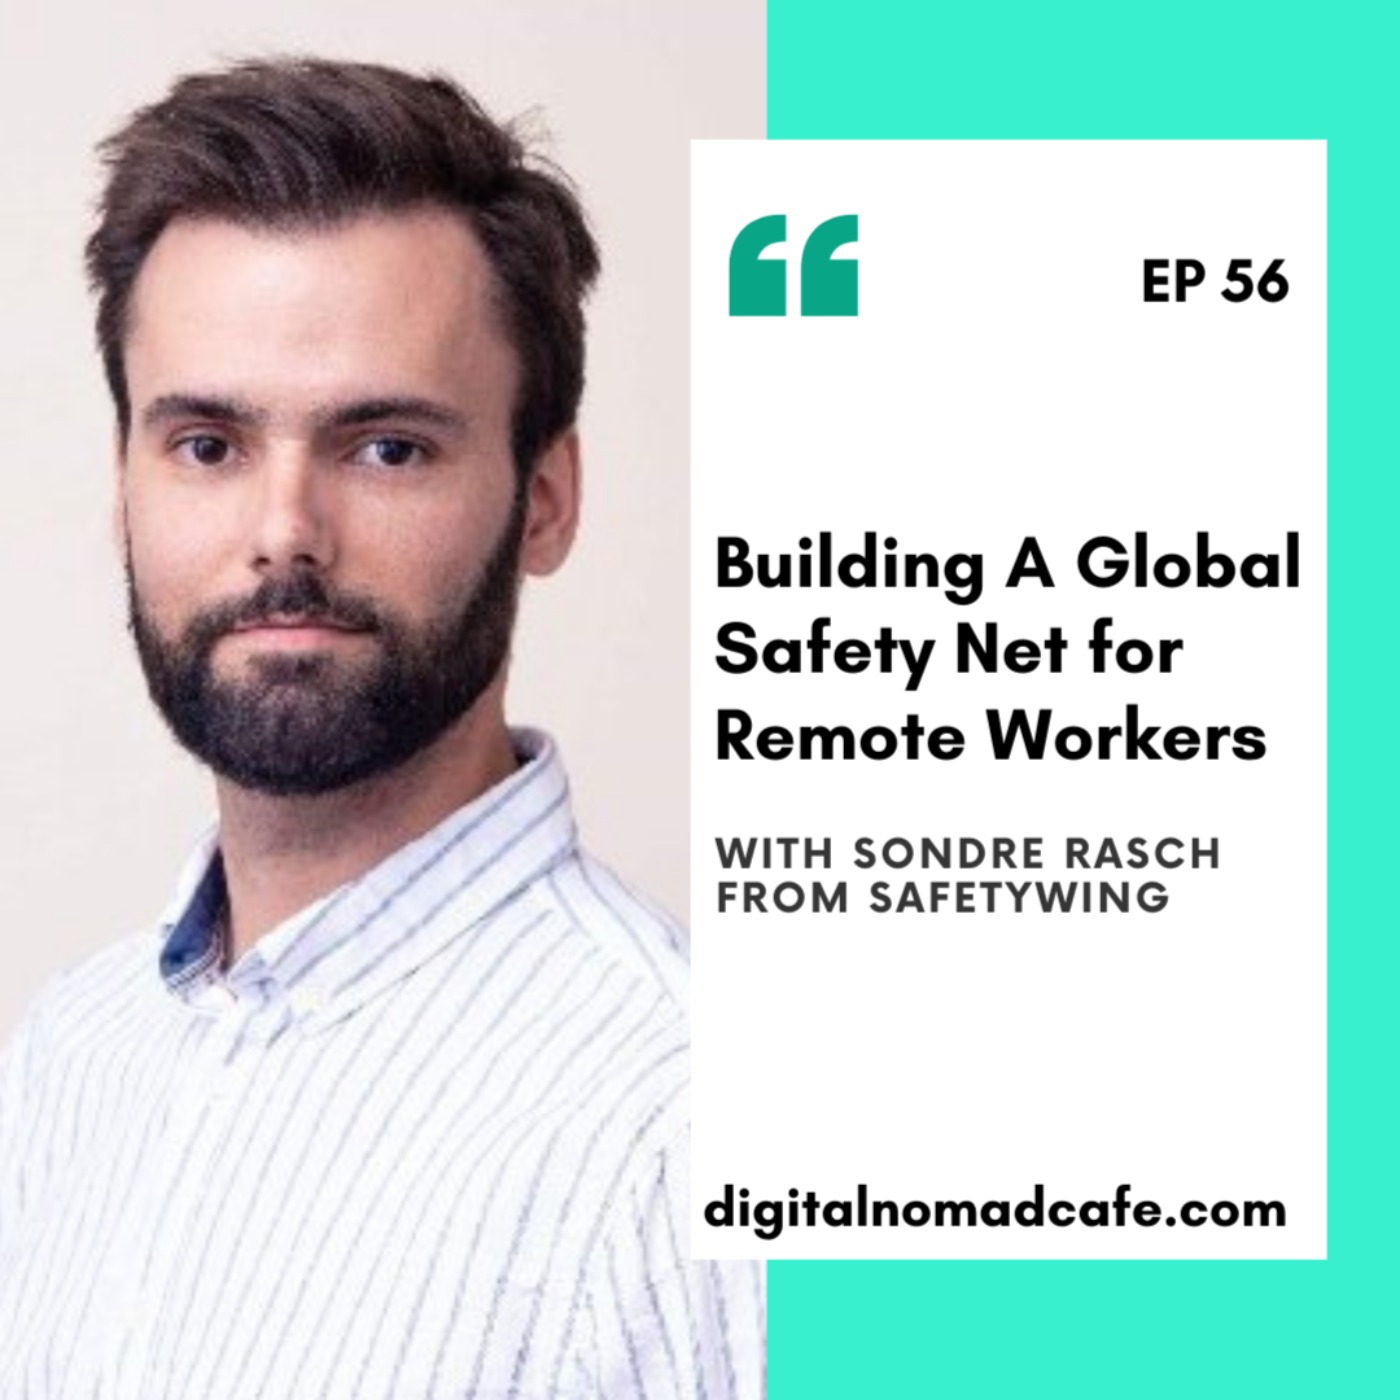 Building A Global Safety Net for Remote Workers with Sondre Rasch from SafetyWing